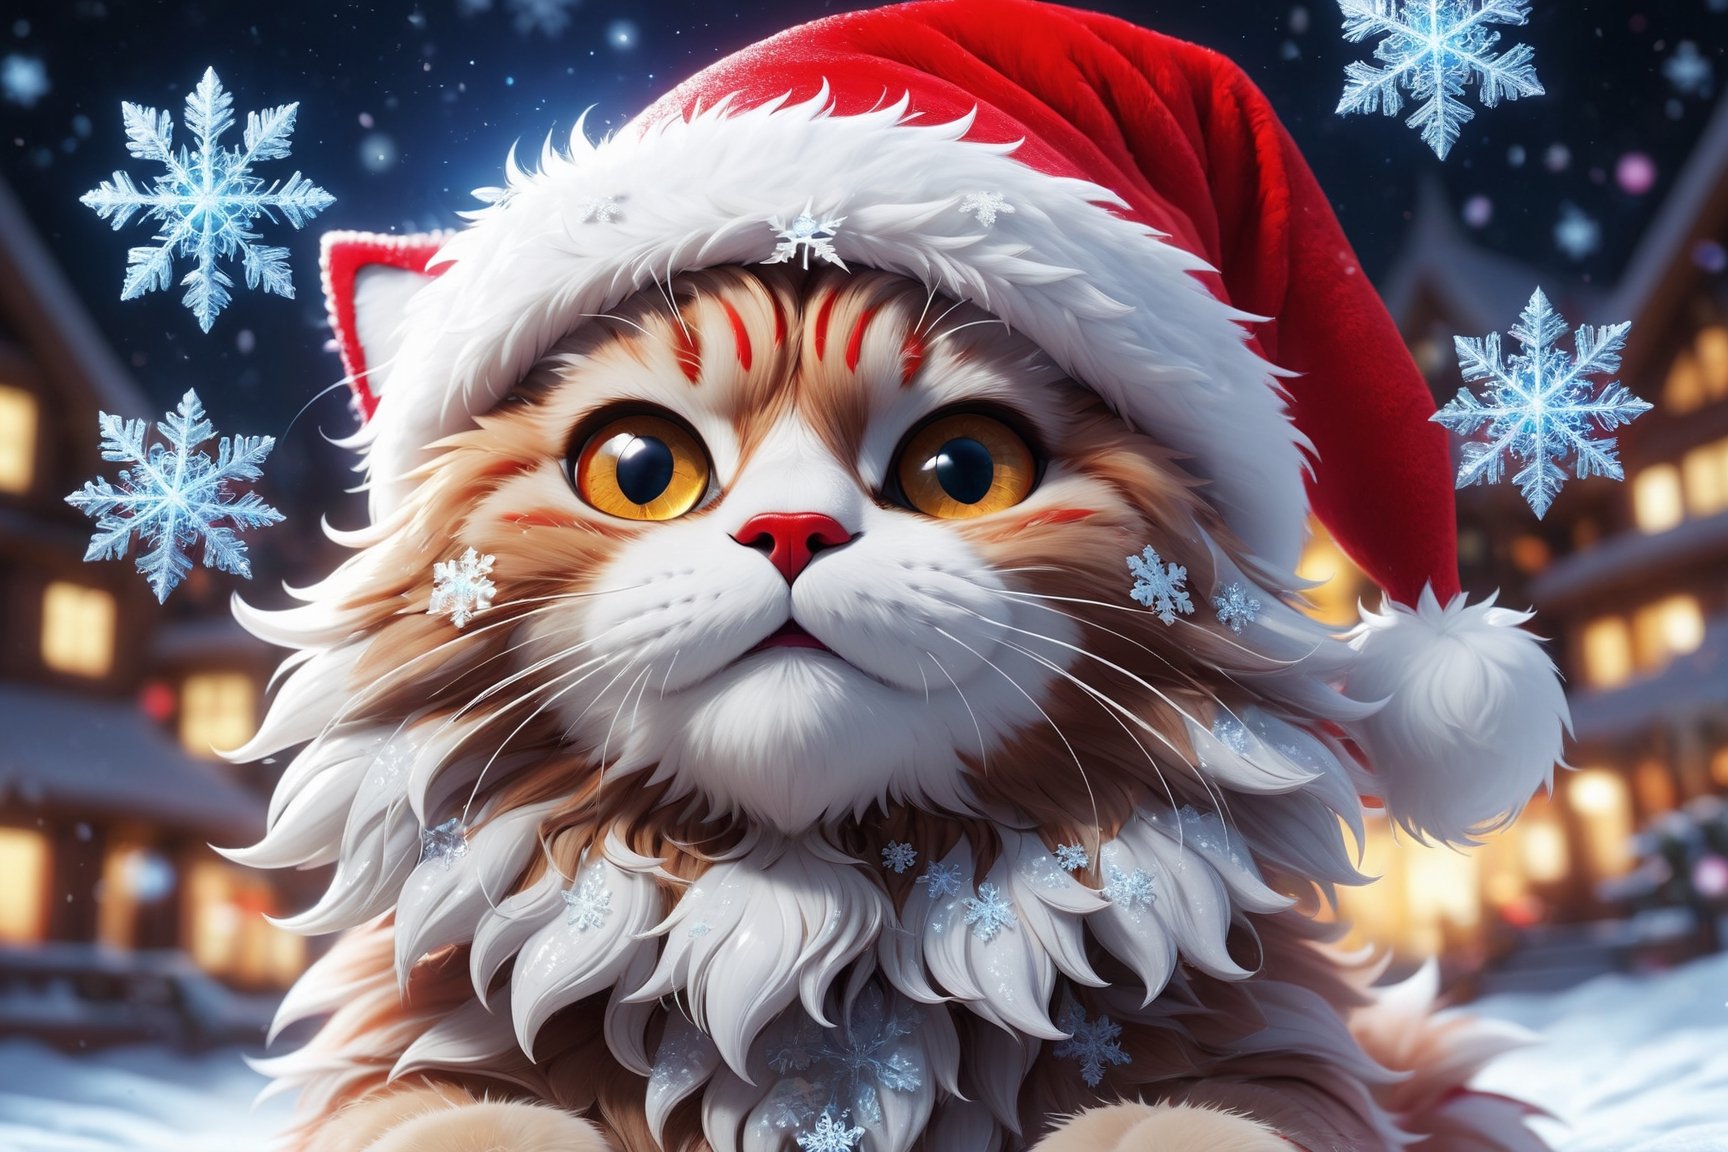 (masterpiece, high quality, insanely beautiful, wide-angle), happy cat-like creature made of (sparkly glassy snowflakes), red_santa_hat, glassy fur, fantasy scene, semi-transparent, reflexions, fisheye lenses effect, global illumination, best geometry